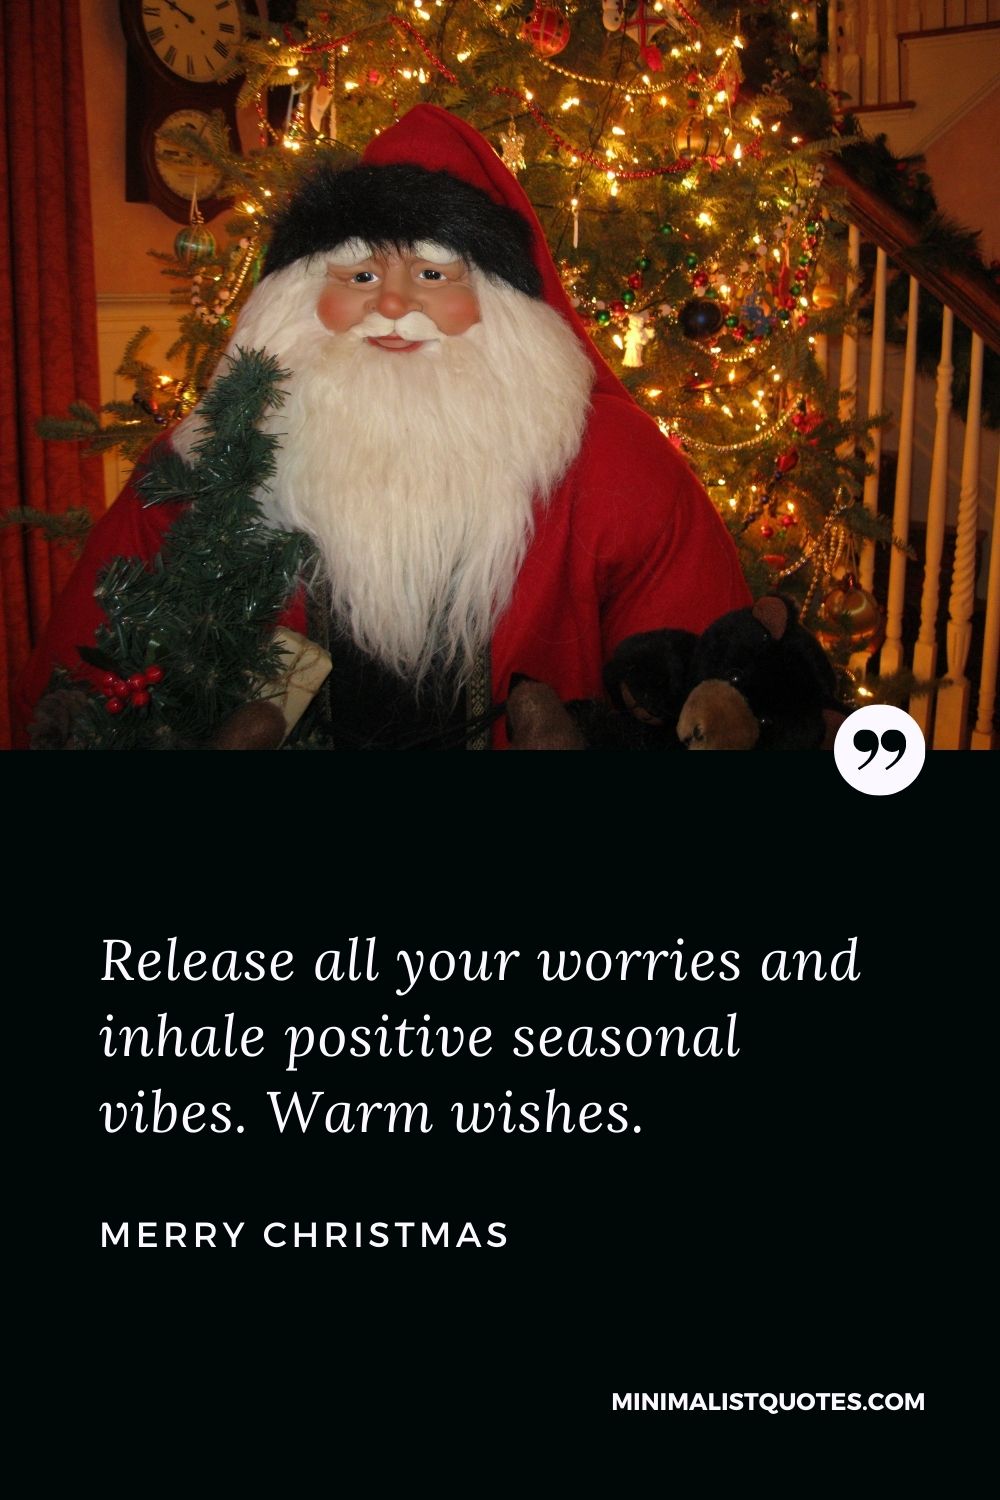 Merry Christmas Wish - Release all your worries and inhale positive seasonal vibes. Warm wishes.